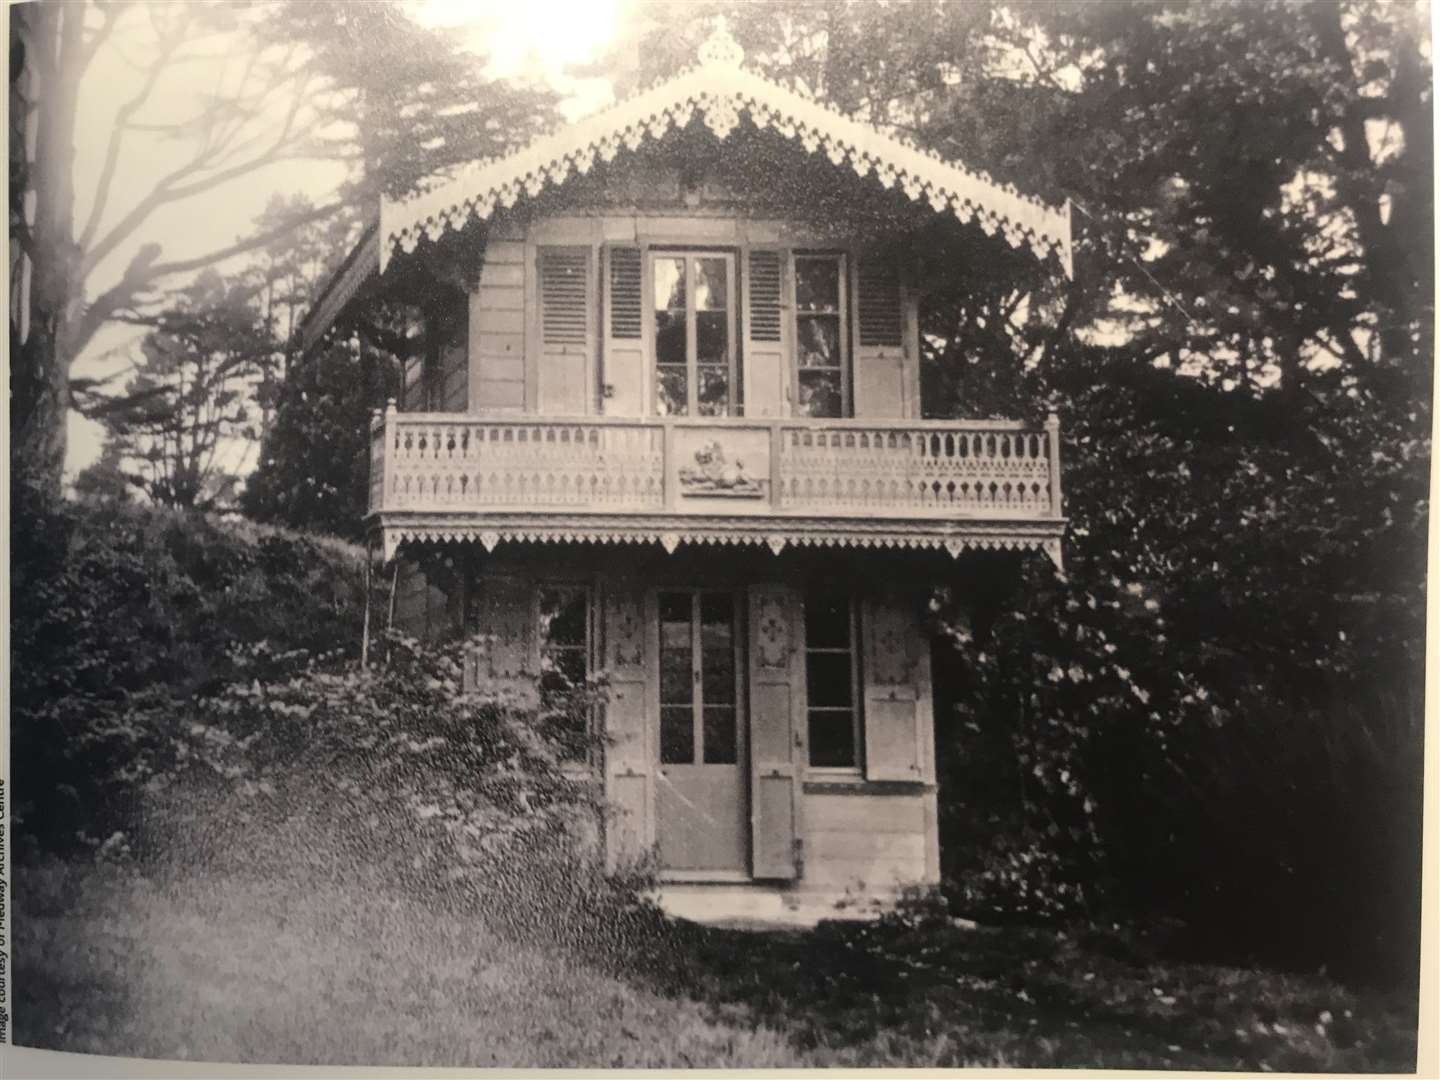 The Swiss Chalet in its original position in Gads Hill. From the exhibition in Eastgate House